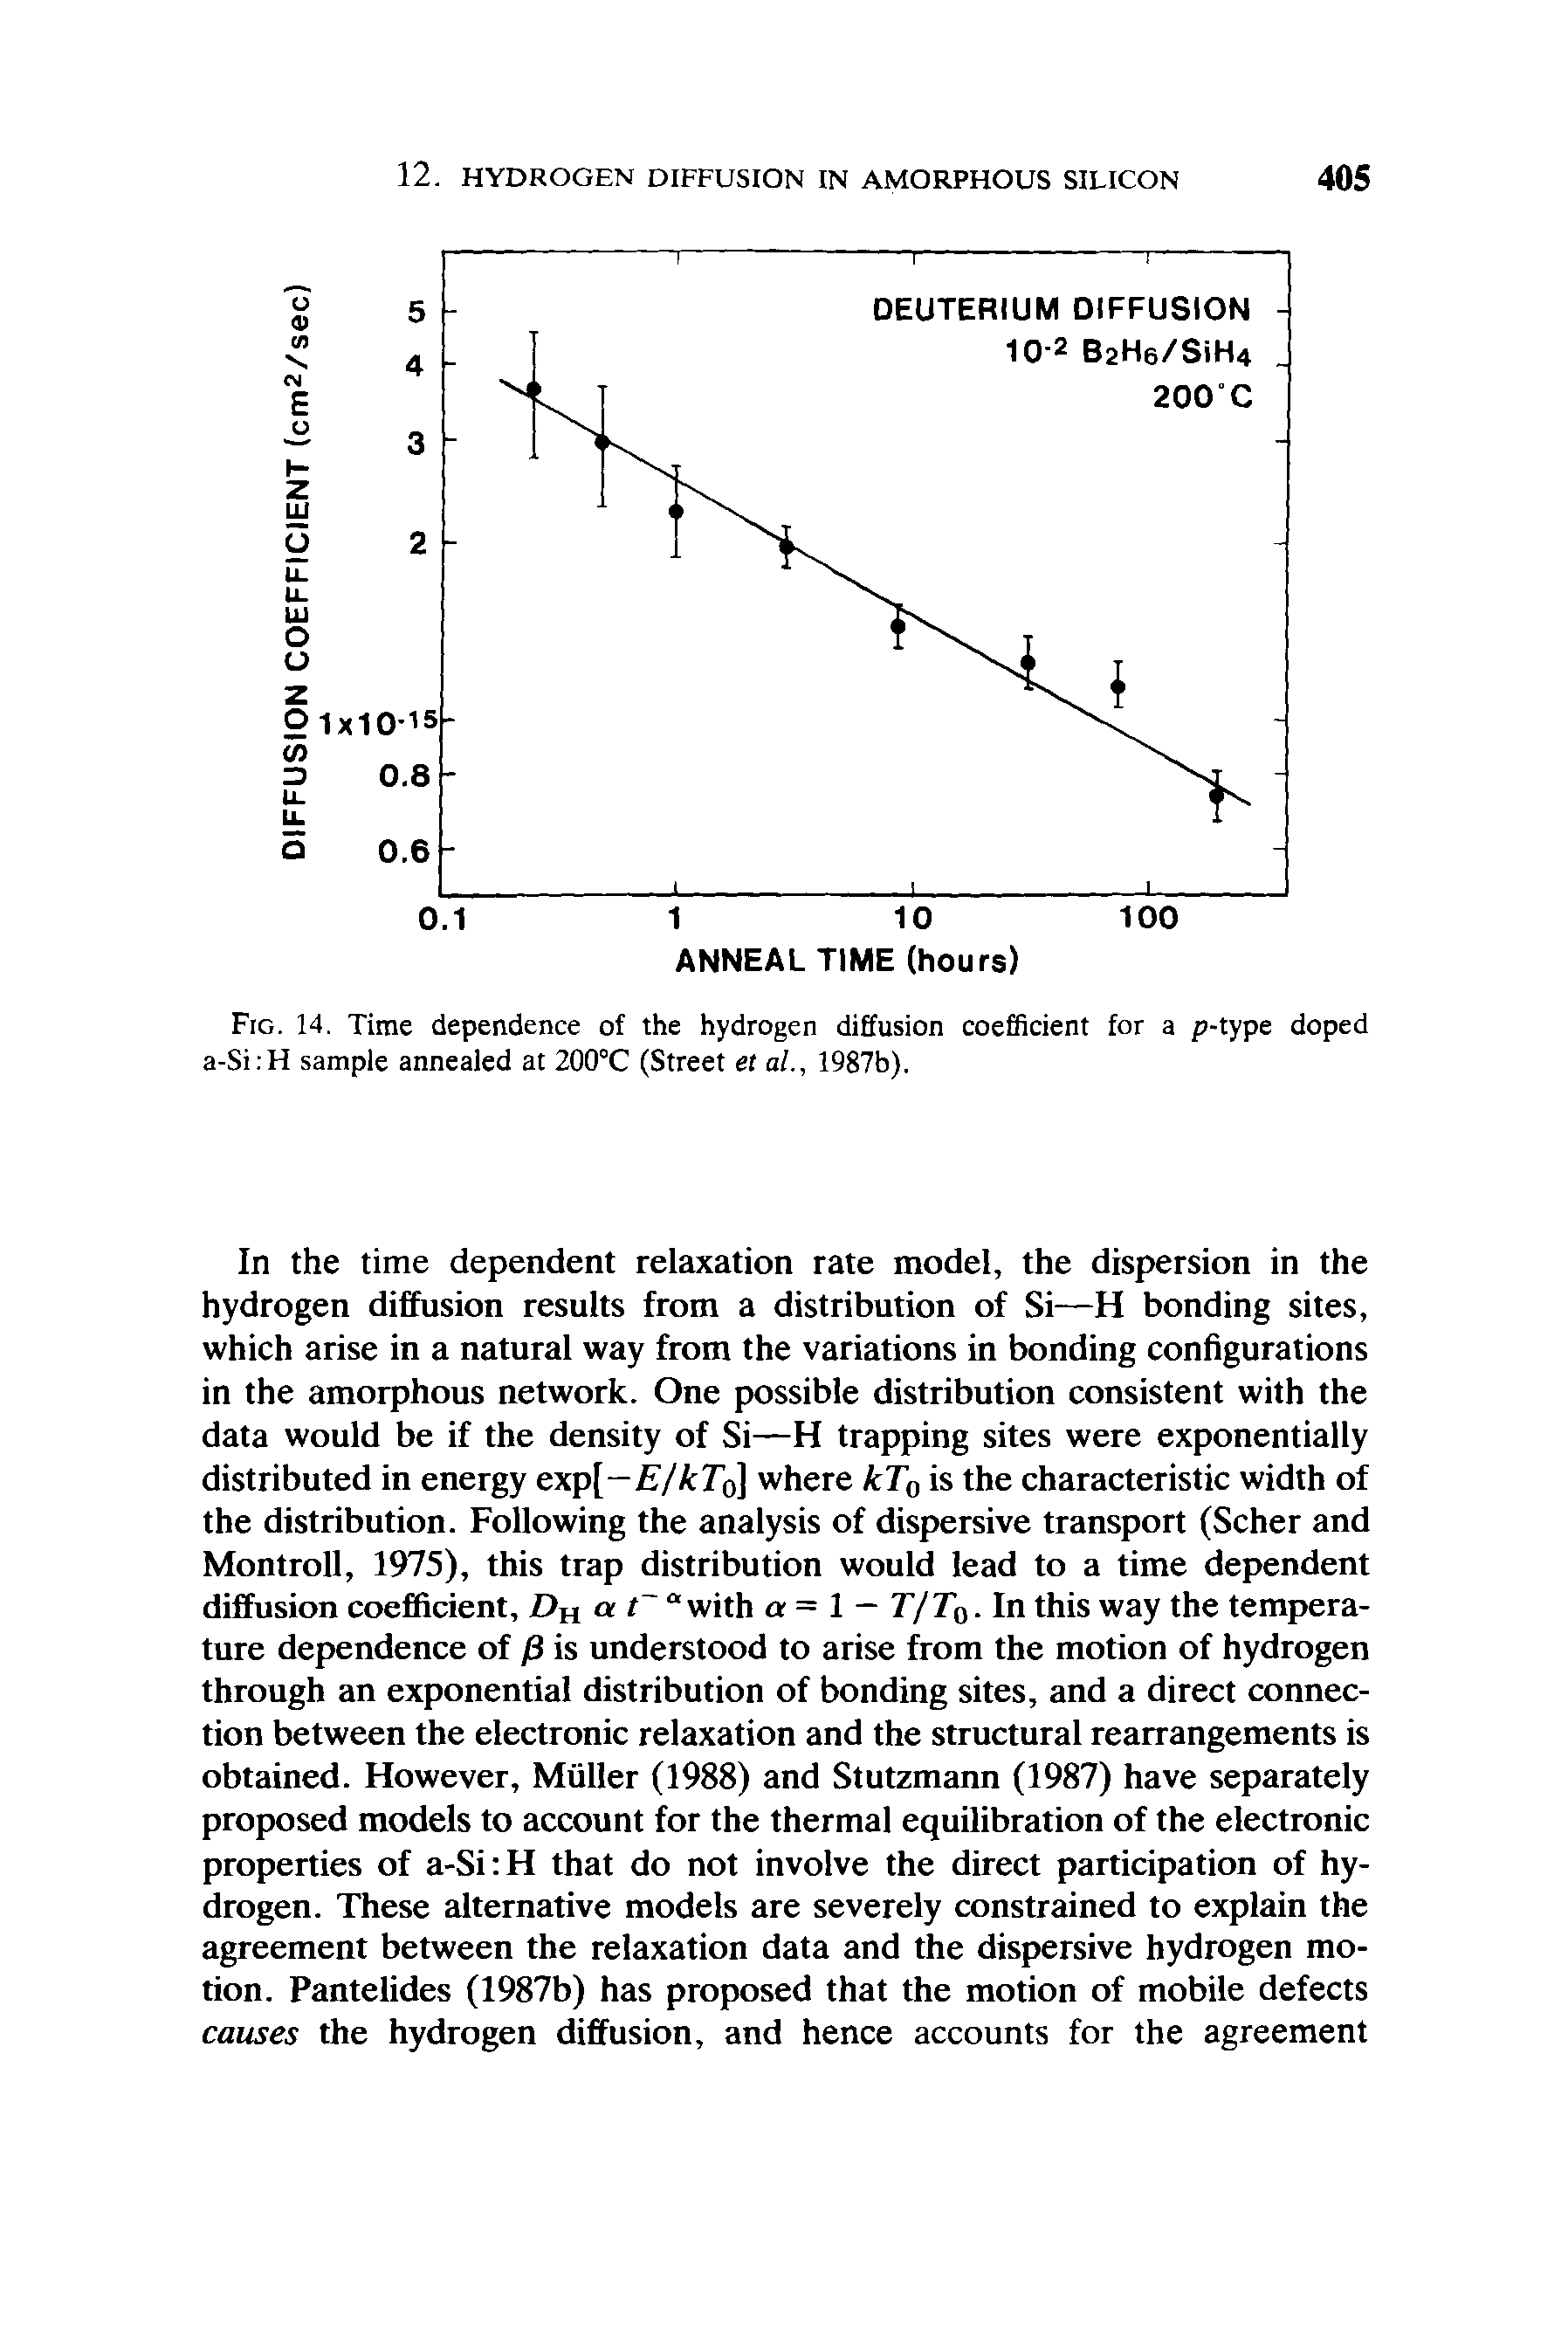 Fig. 14. Time dependence of the hydrogen diffusion coefficient for a p-type doped a-Si H sample annealed at 200°C (Street et al., 1987b).